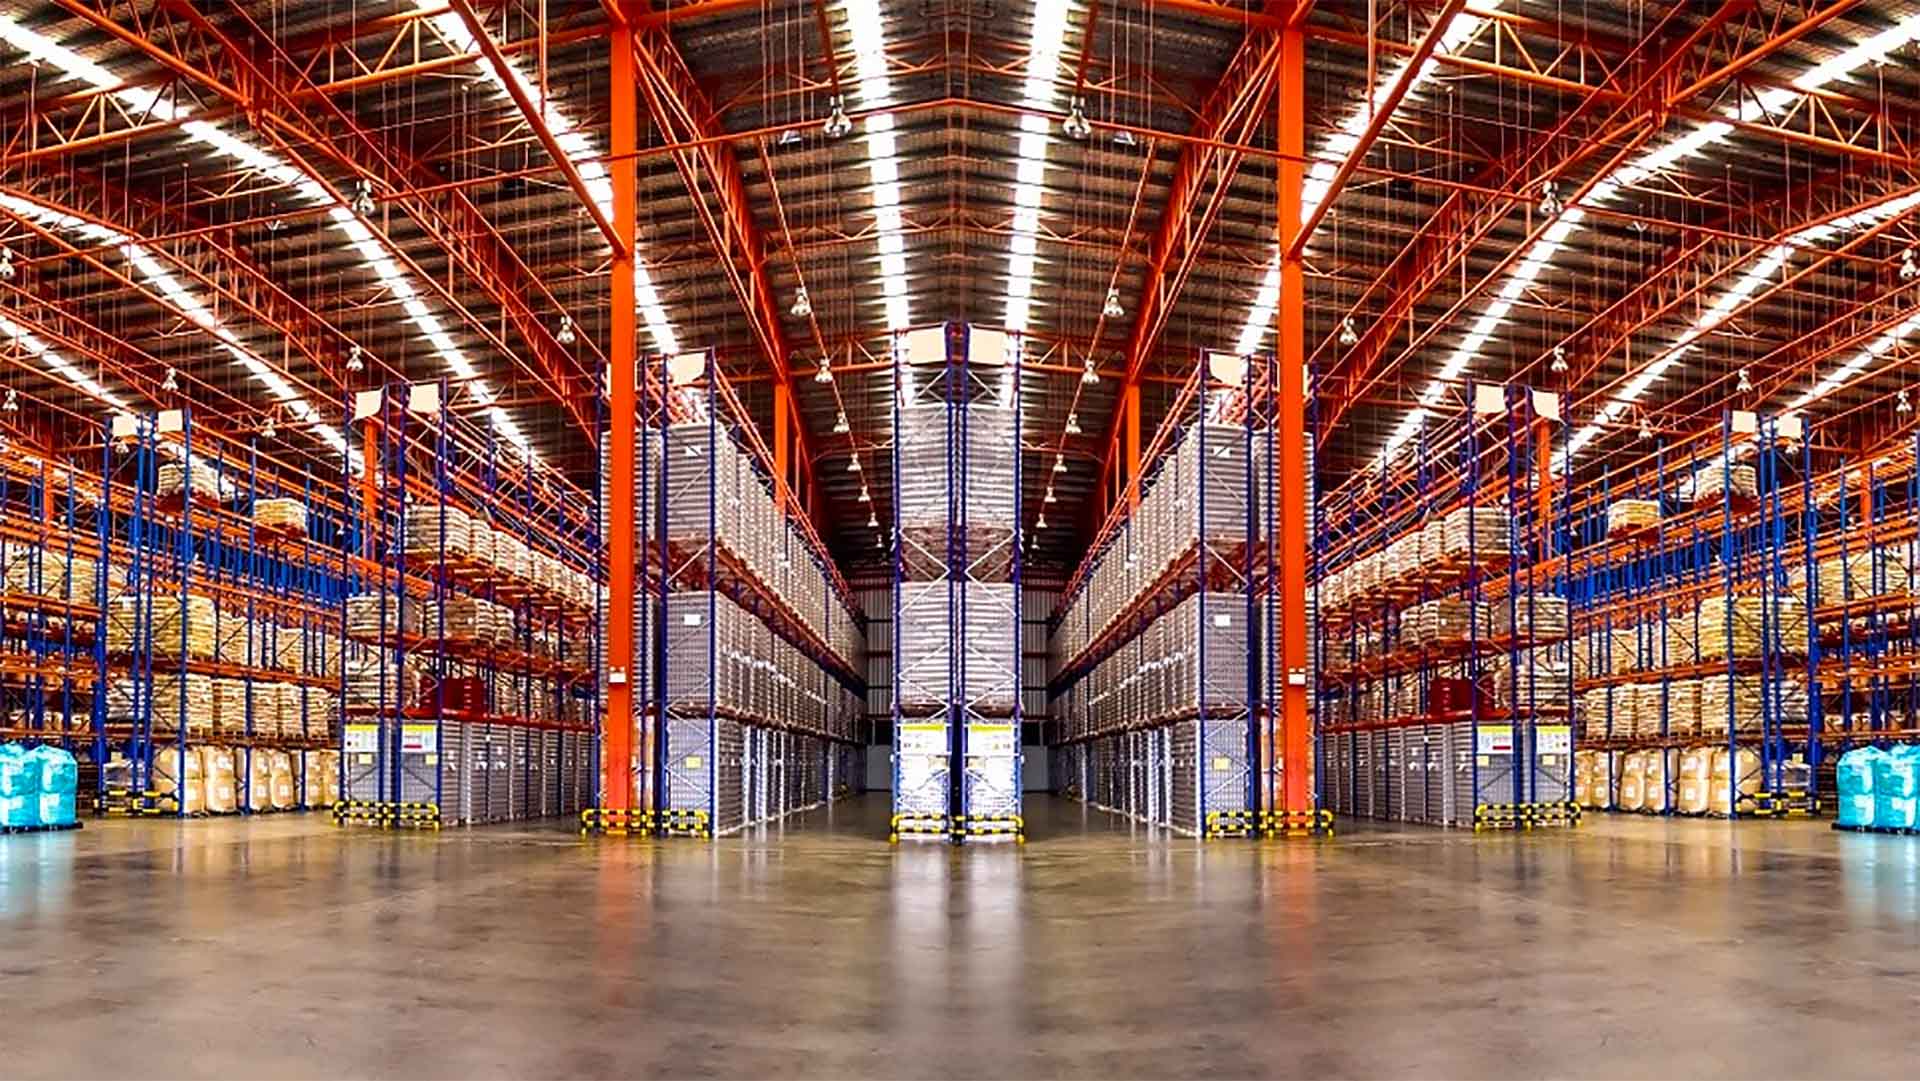 A large distribution warehouse with many pallets and racks